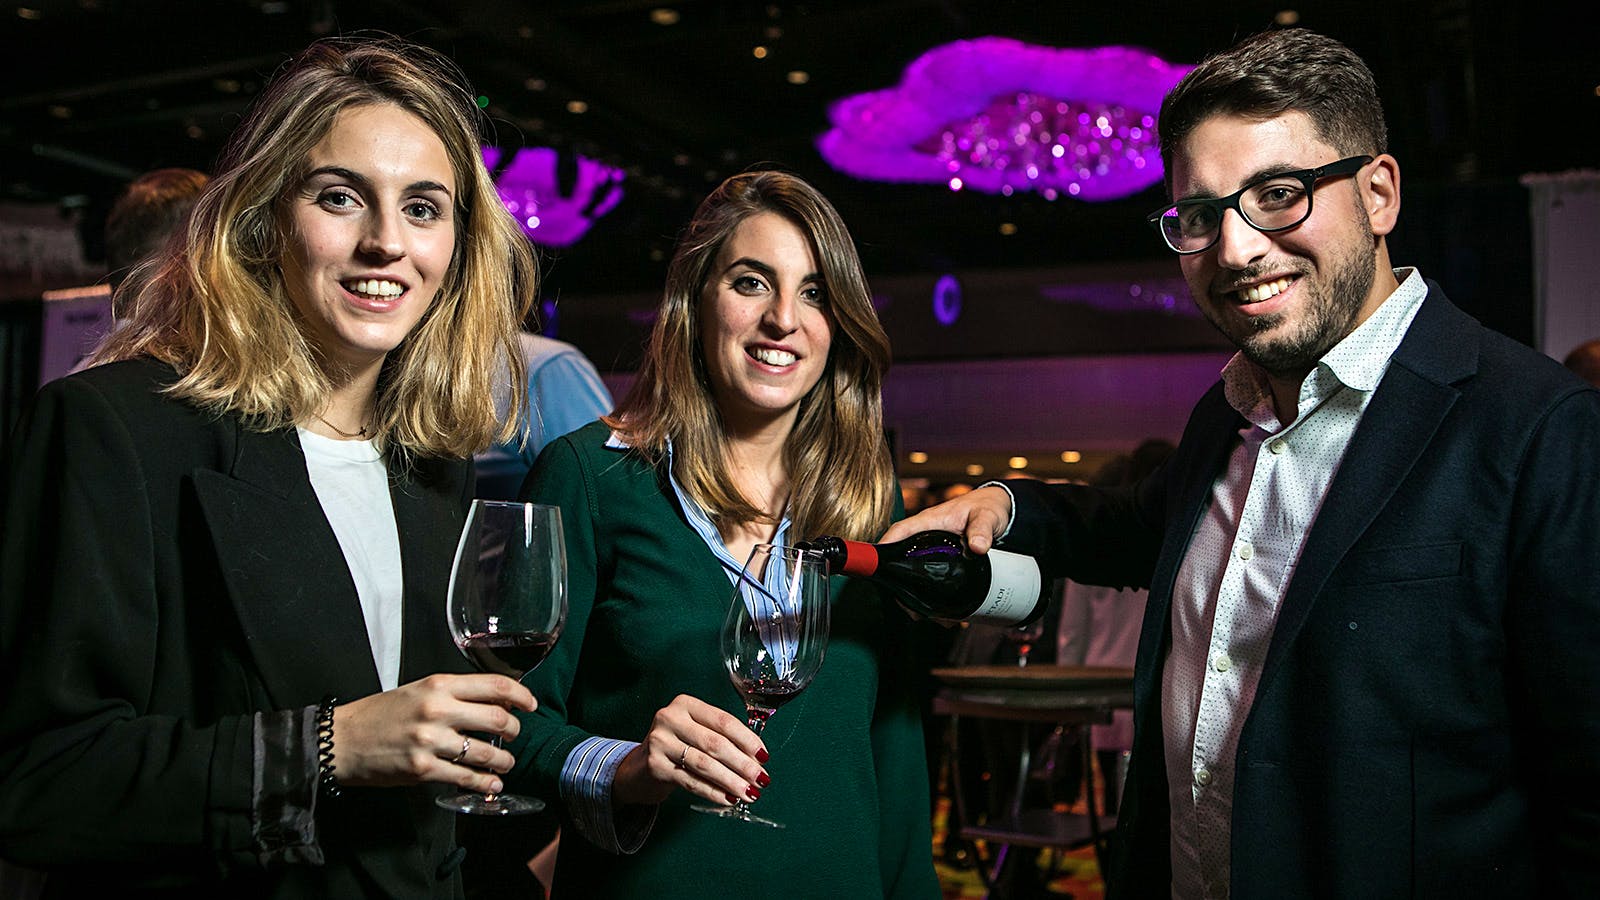 New Dates for Wine Spectator's Grand Tour